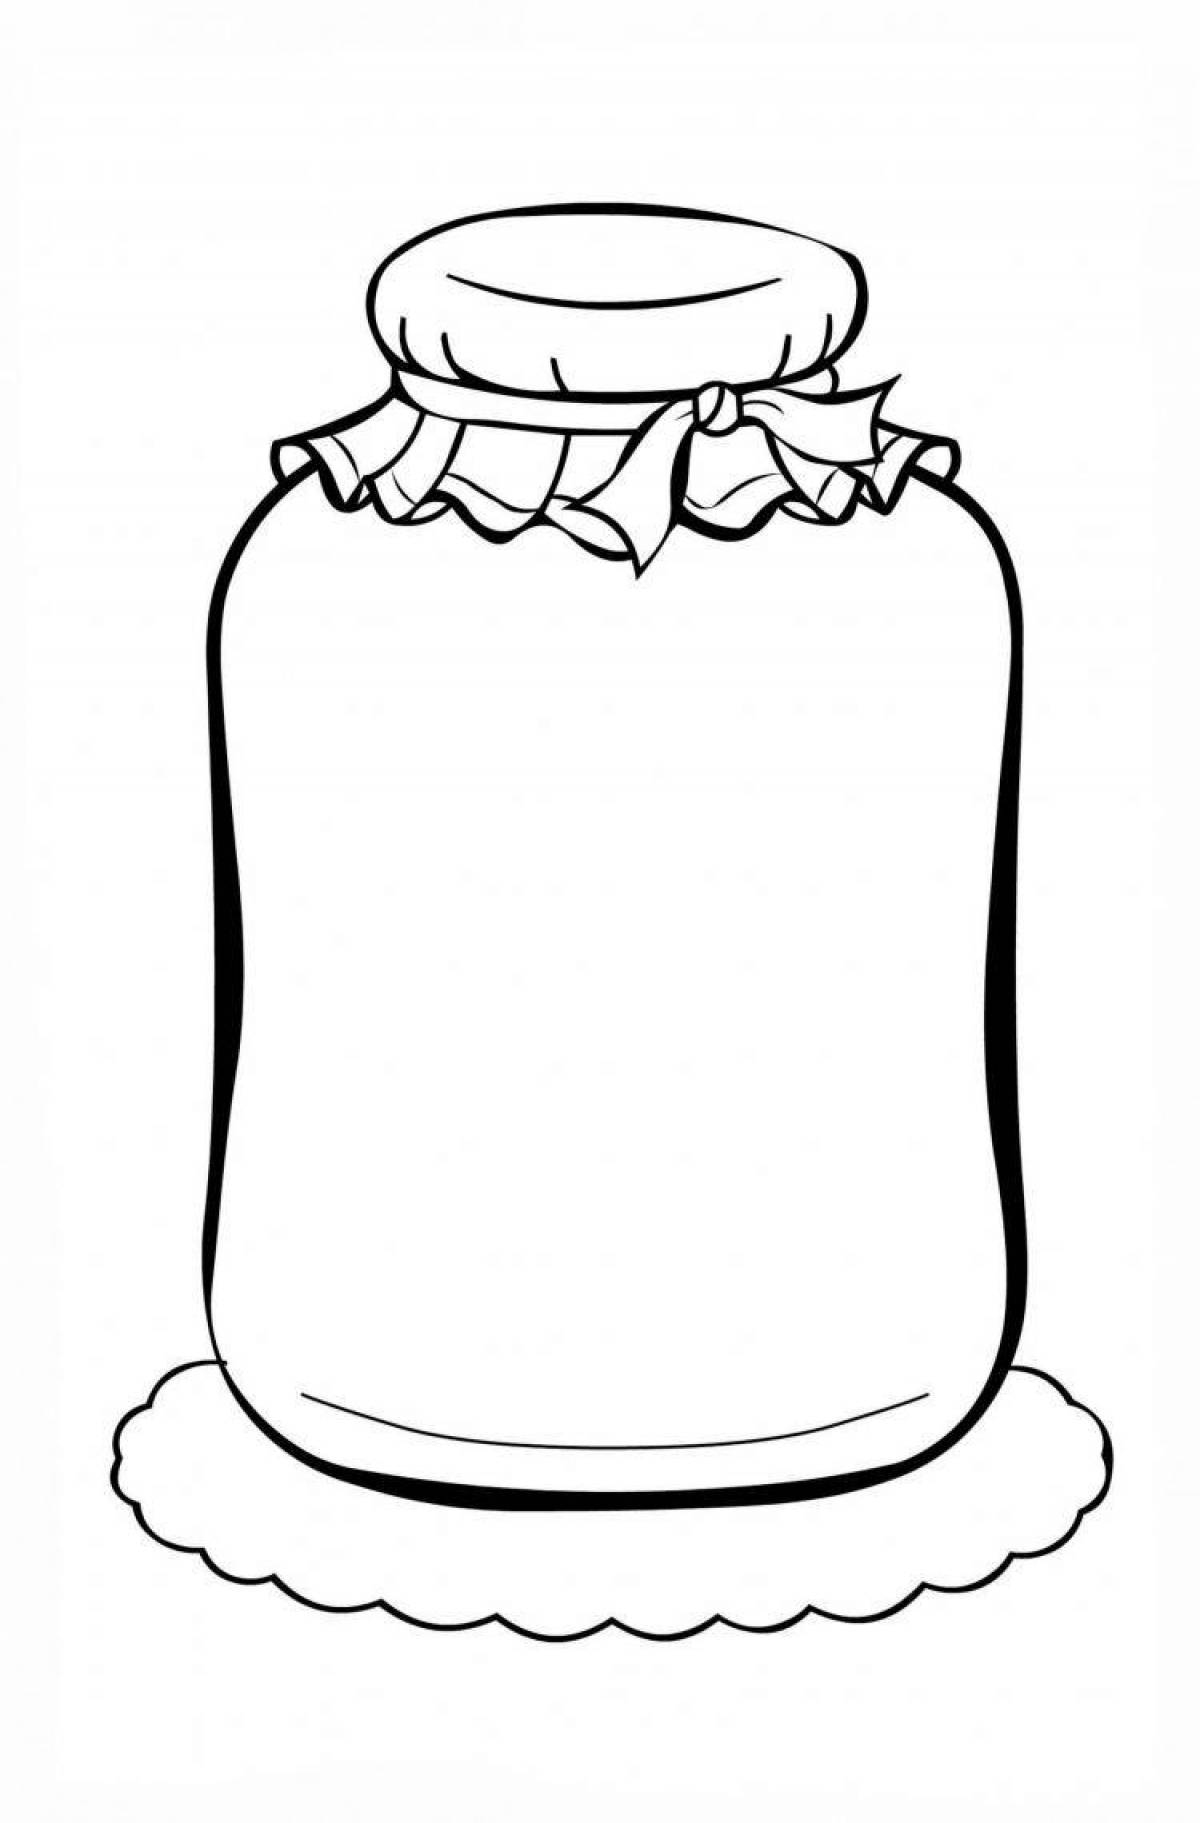 Fun coloring book for kids with an empty glass jar